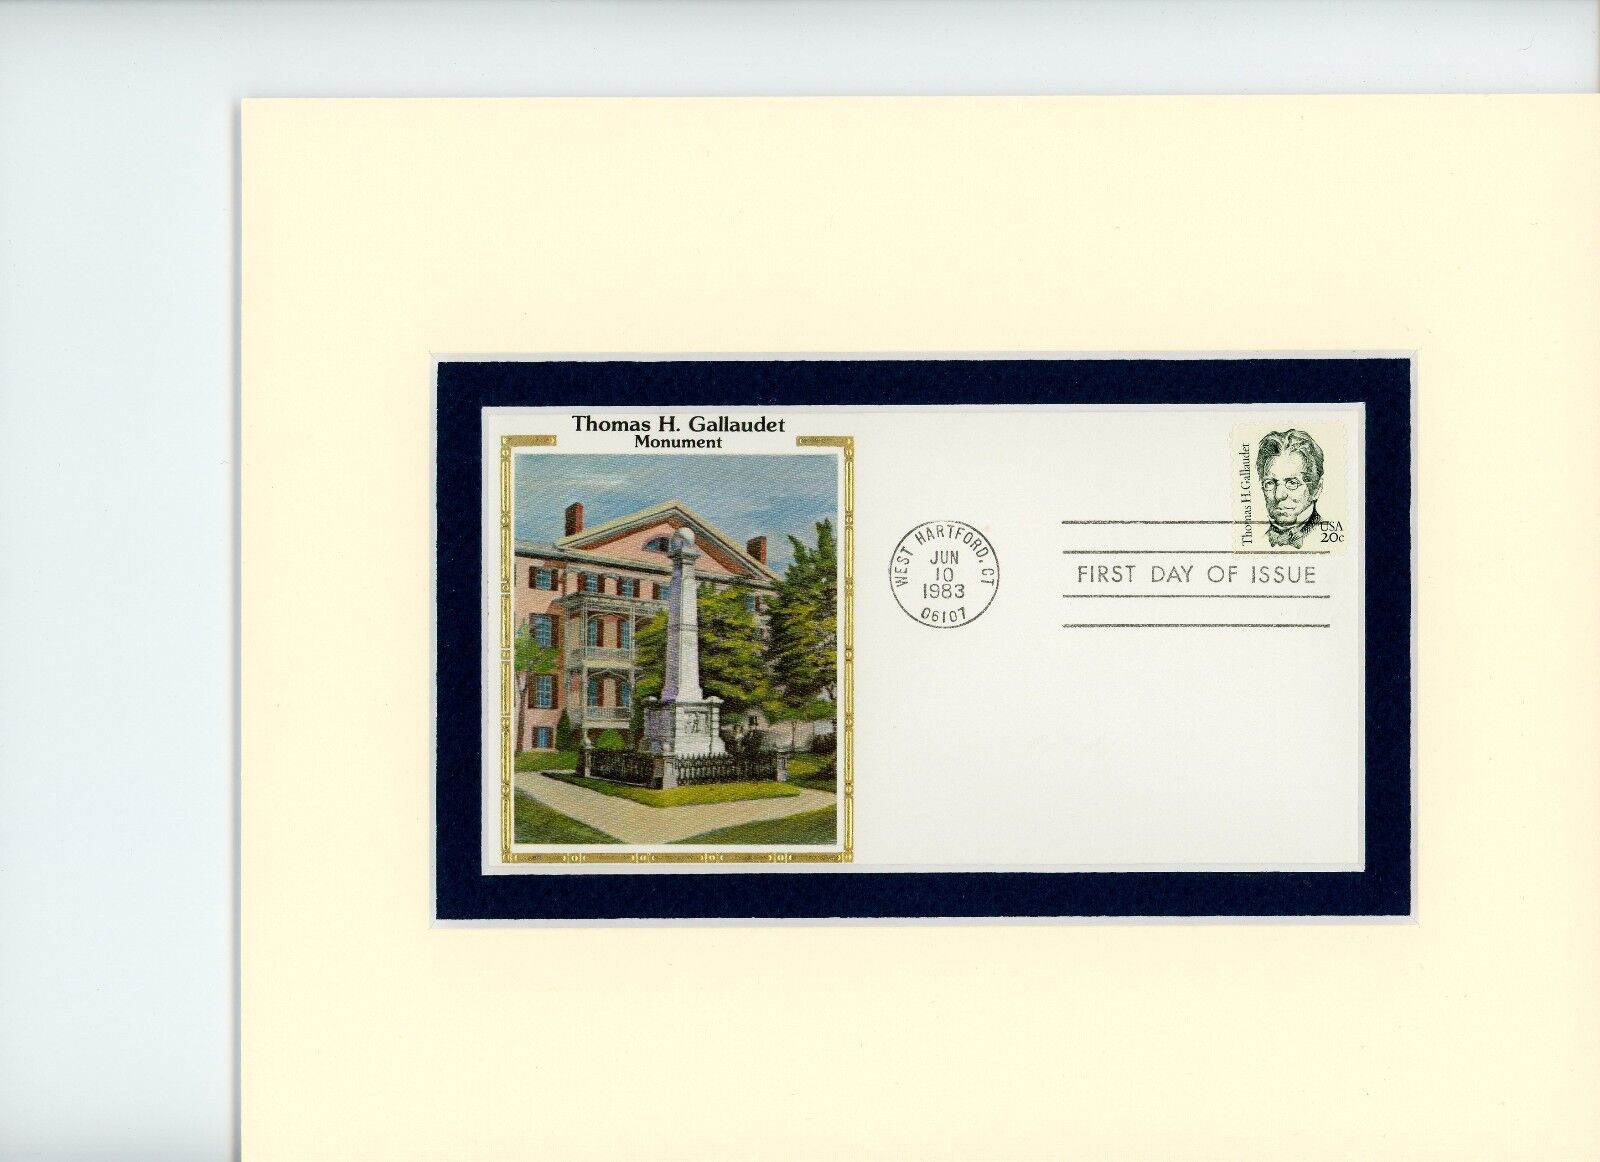 Honoring Thomas Gallaudet &   First Day Cover of the Gallaudet University stamp 